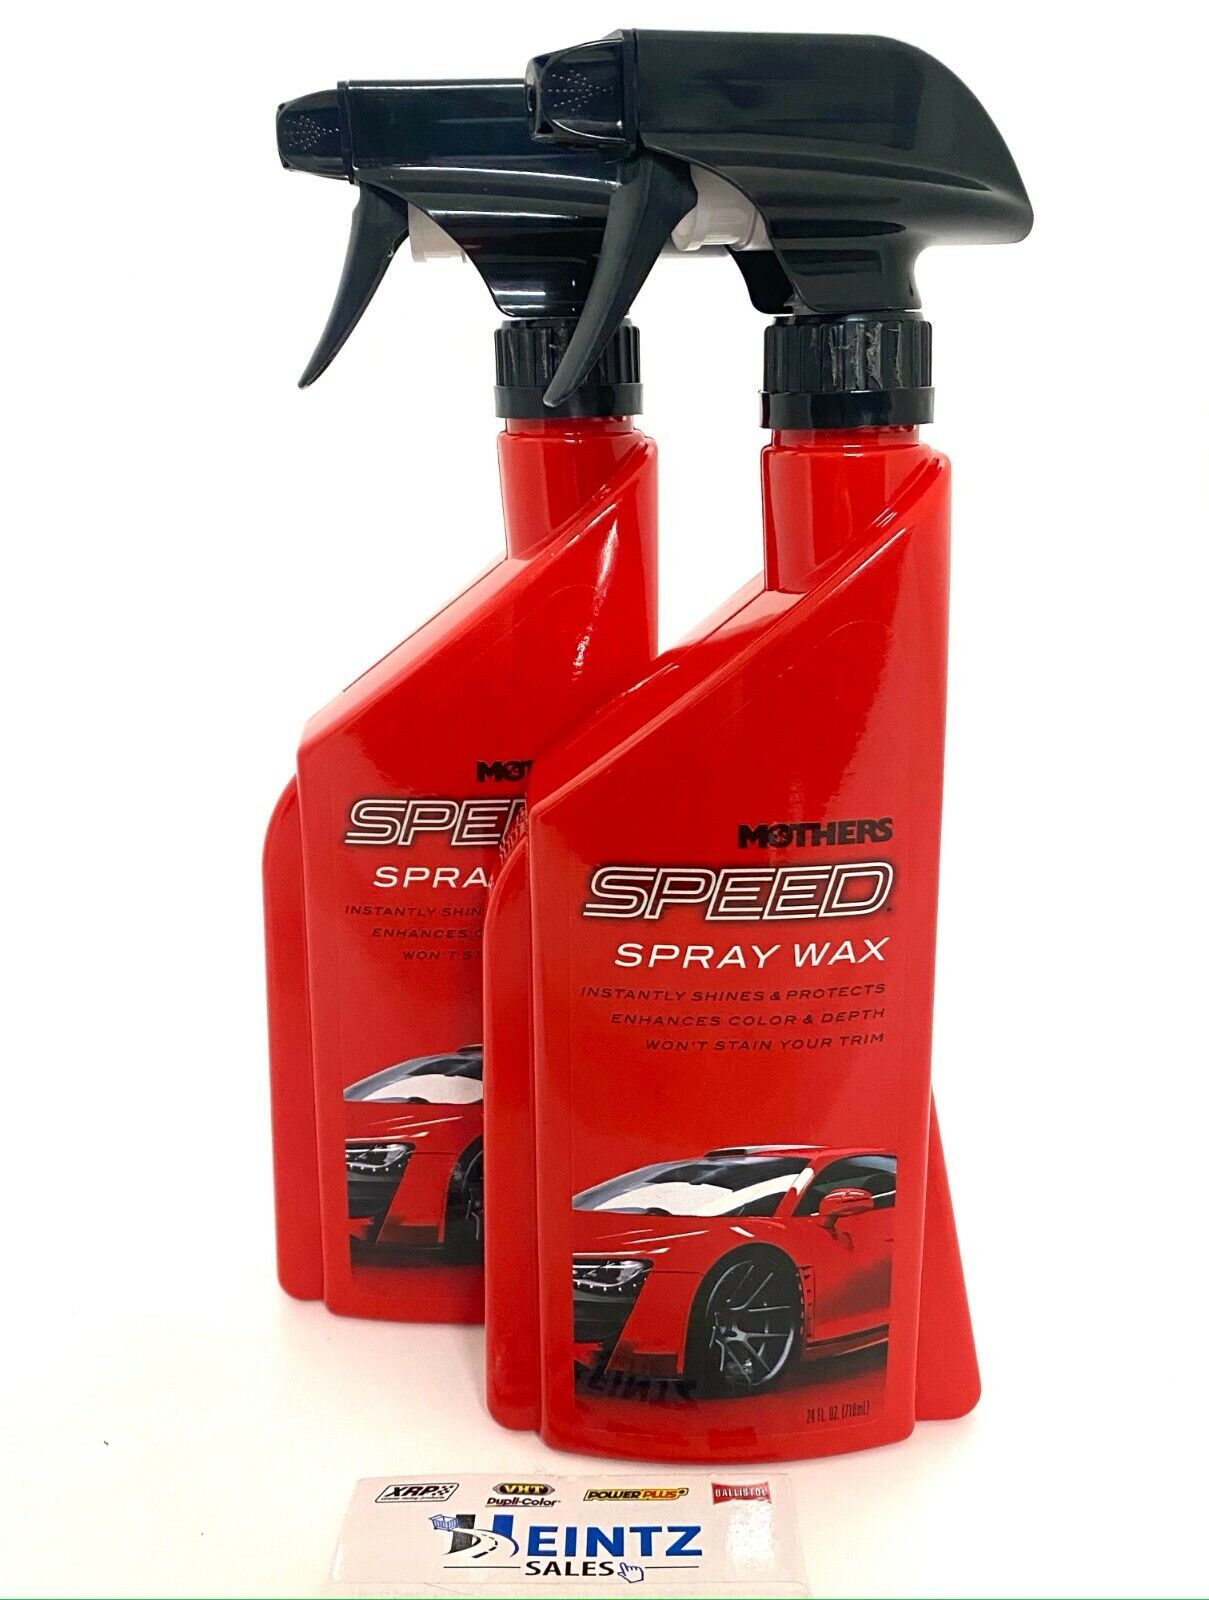 MOTHERS 15724 Speed Spray Wax 2 PACK - Shines & Protects - Color Enhancers - 24 fl. oz.